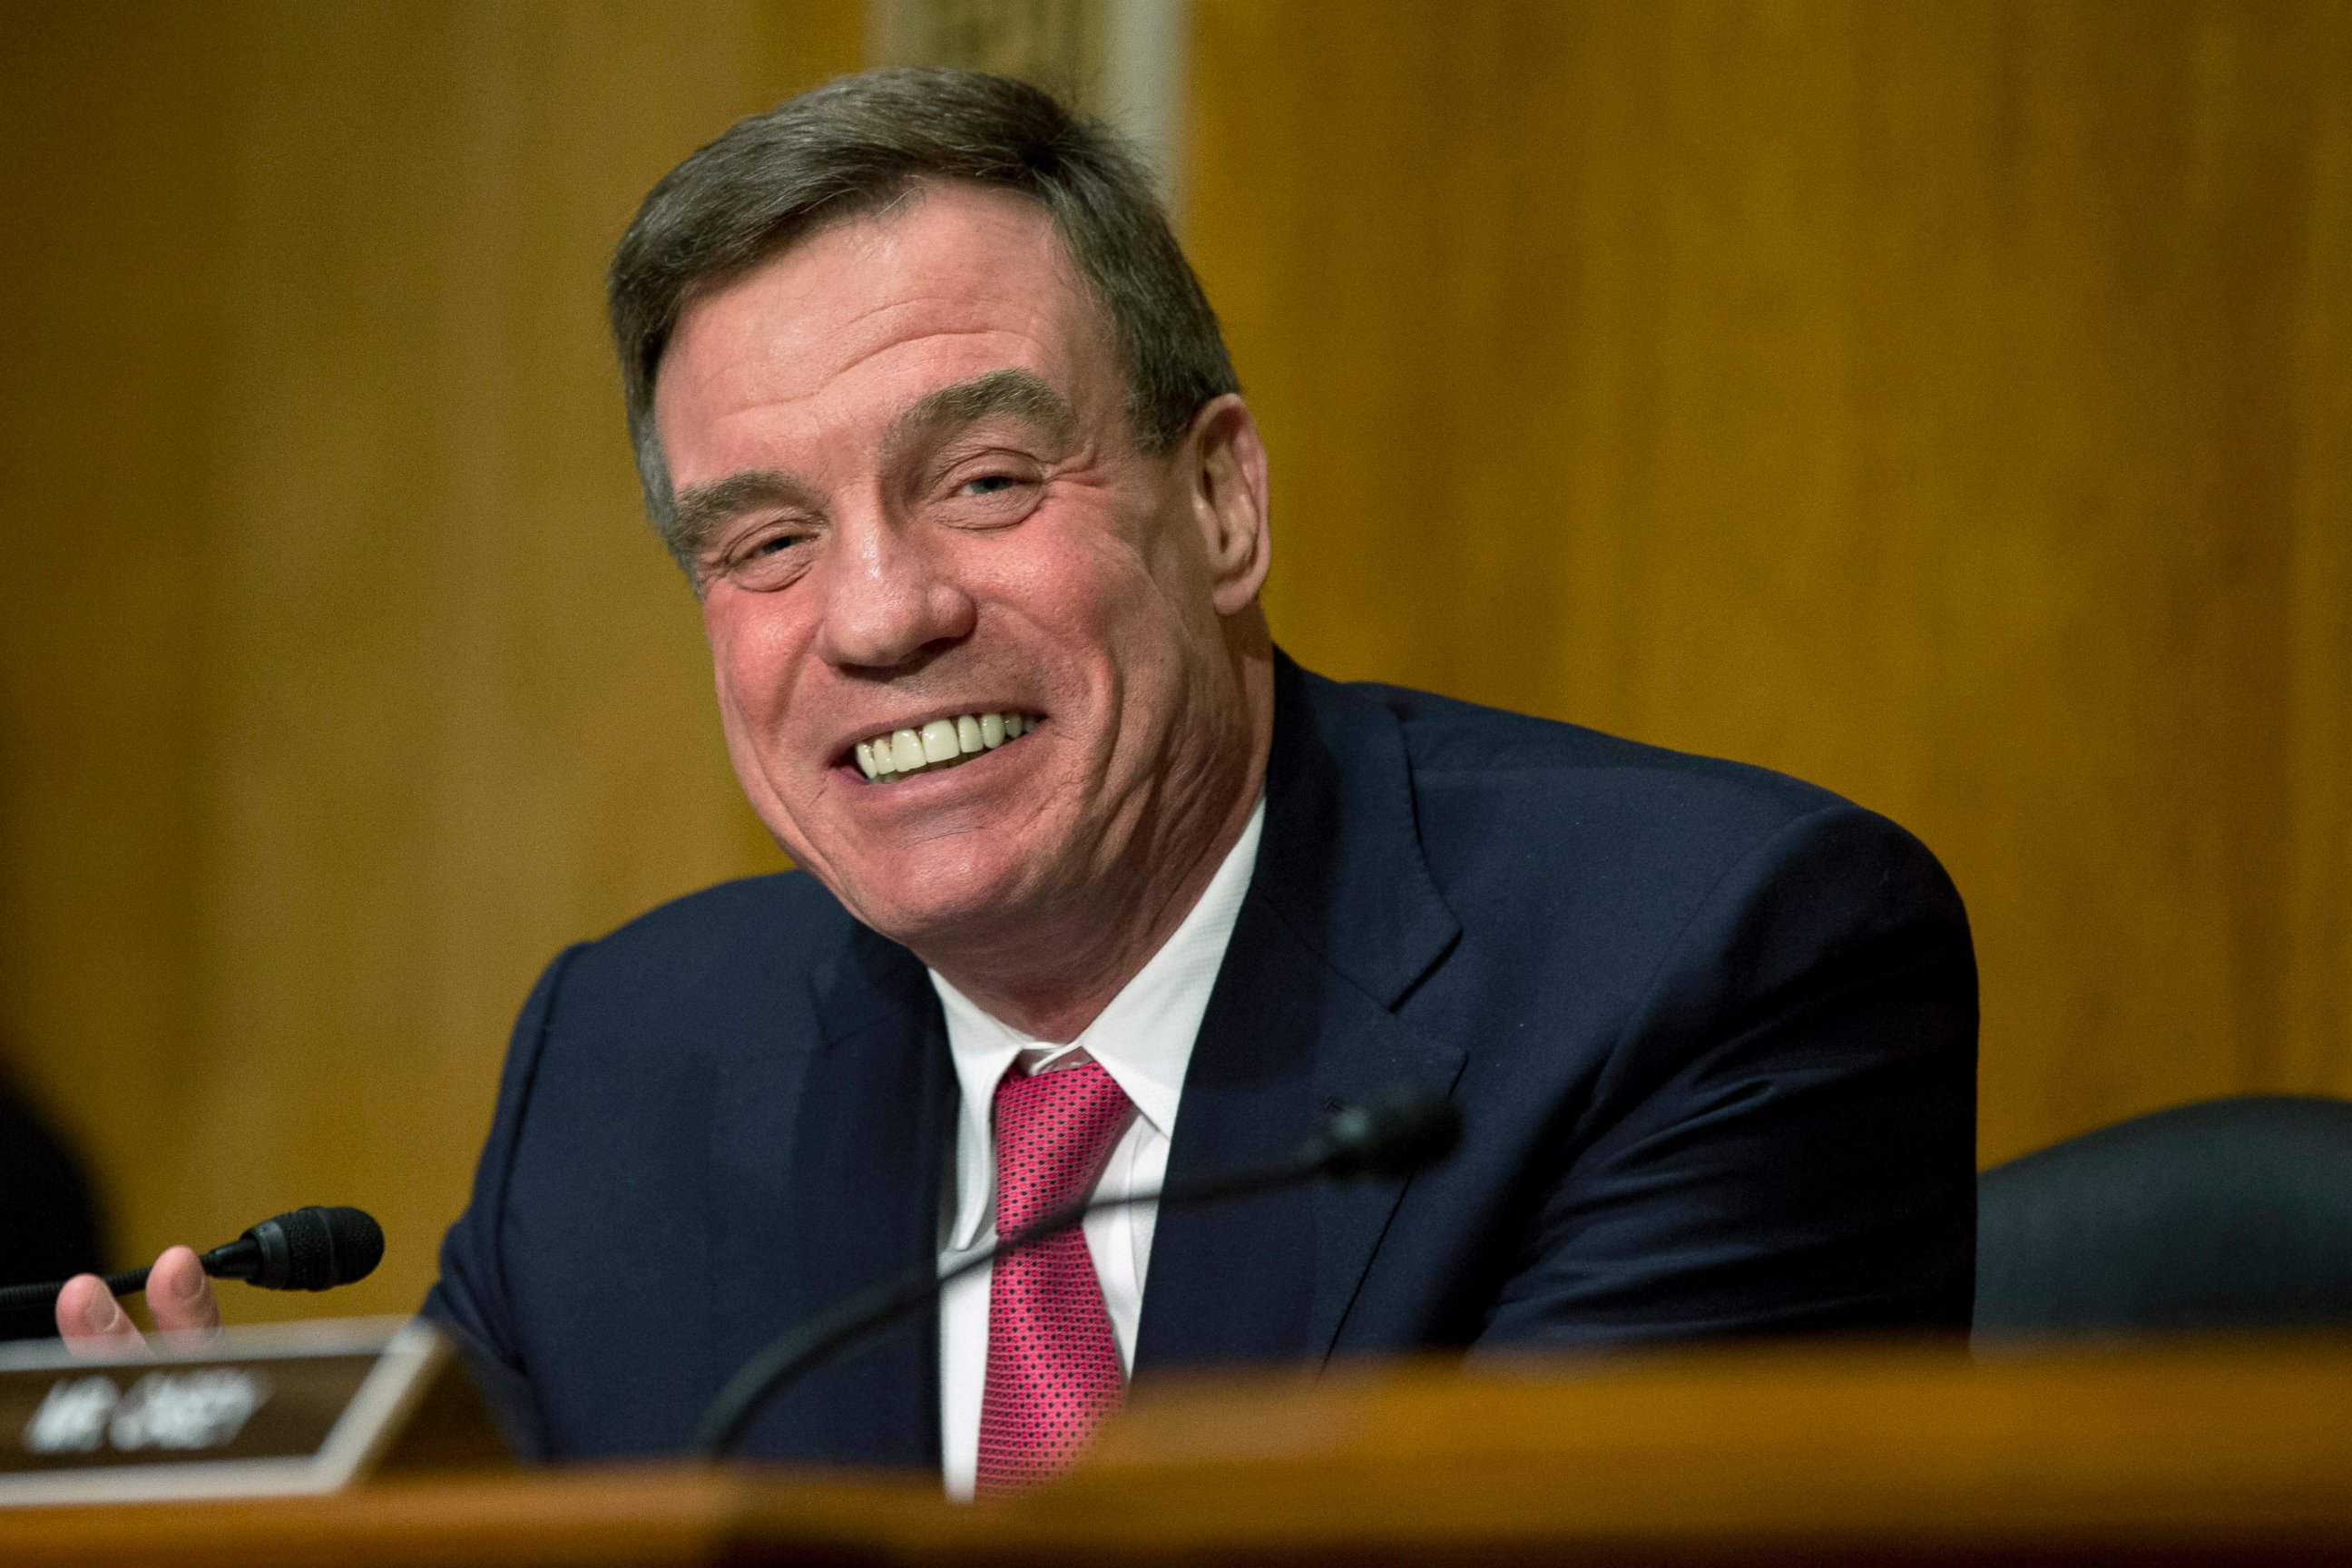 PHOTO: Sen. Mark Warner attends a Senate Finance Committee meeting on Capitol Hill in Washington, March 5, 2014.